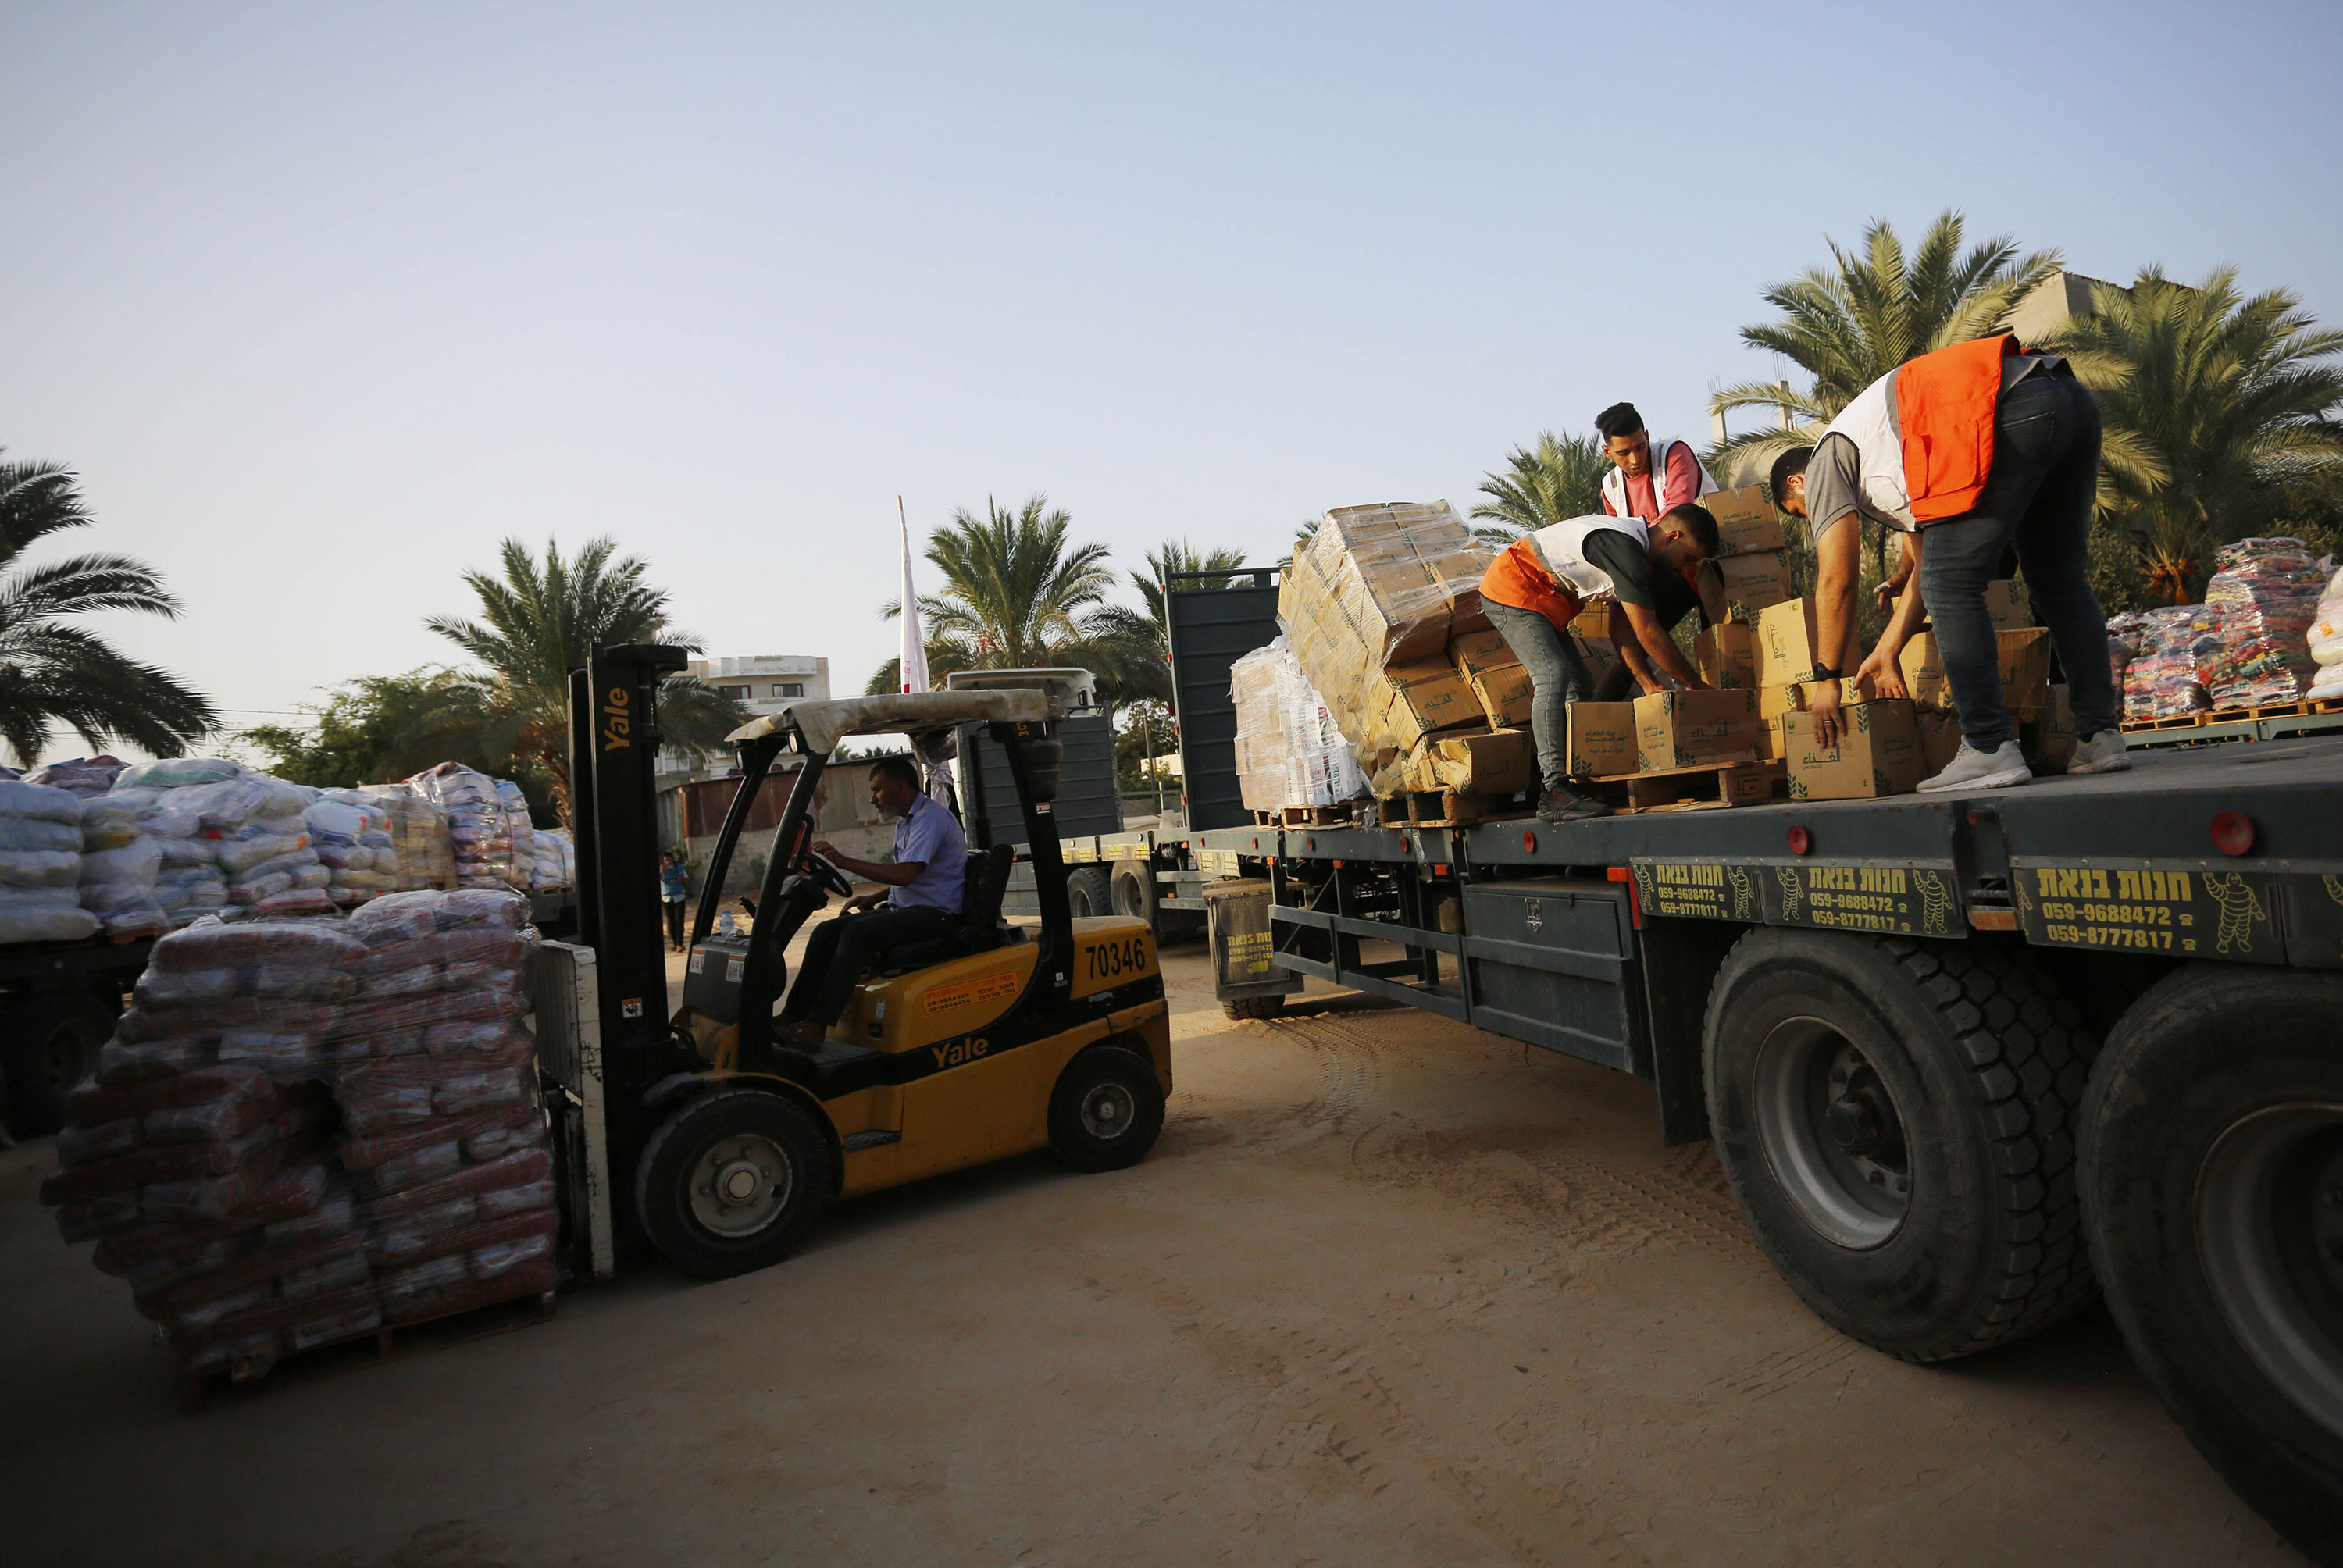 Members of Palestine Red Crescent Society organize humanitarian aid sent by the World Health Organization, after entering Gaza through the Rafah border crossing in Khan Younis, Gaza, on Monday.